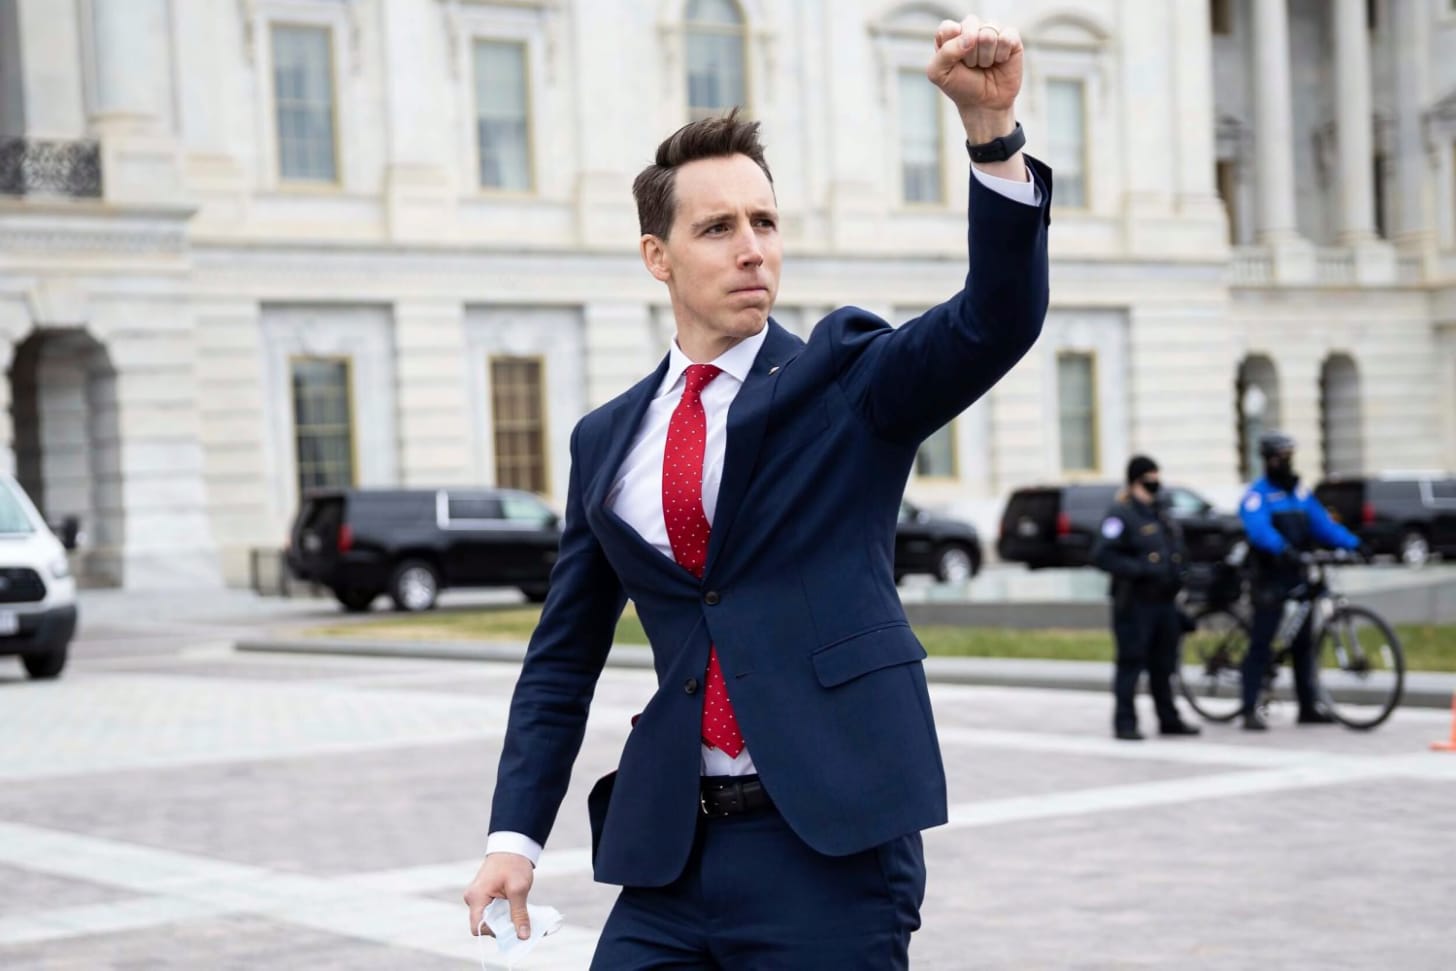 Josh Hawley seen fleeing pro-Trump mob he 'riled up' with fist salute in  newly released Jan. 6 footage